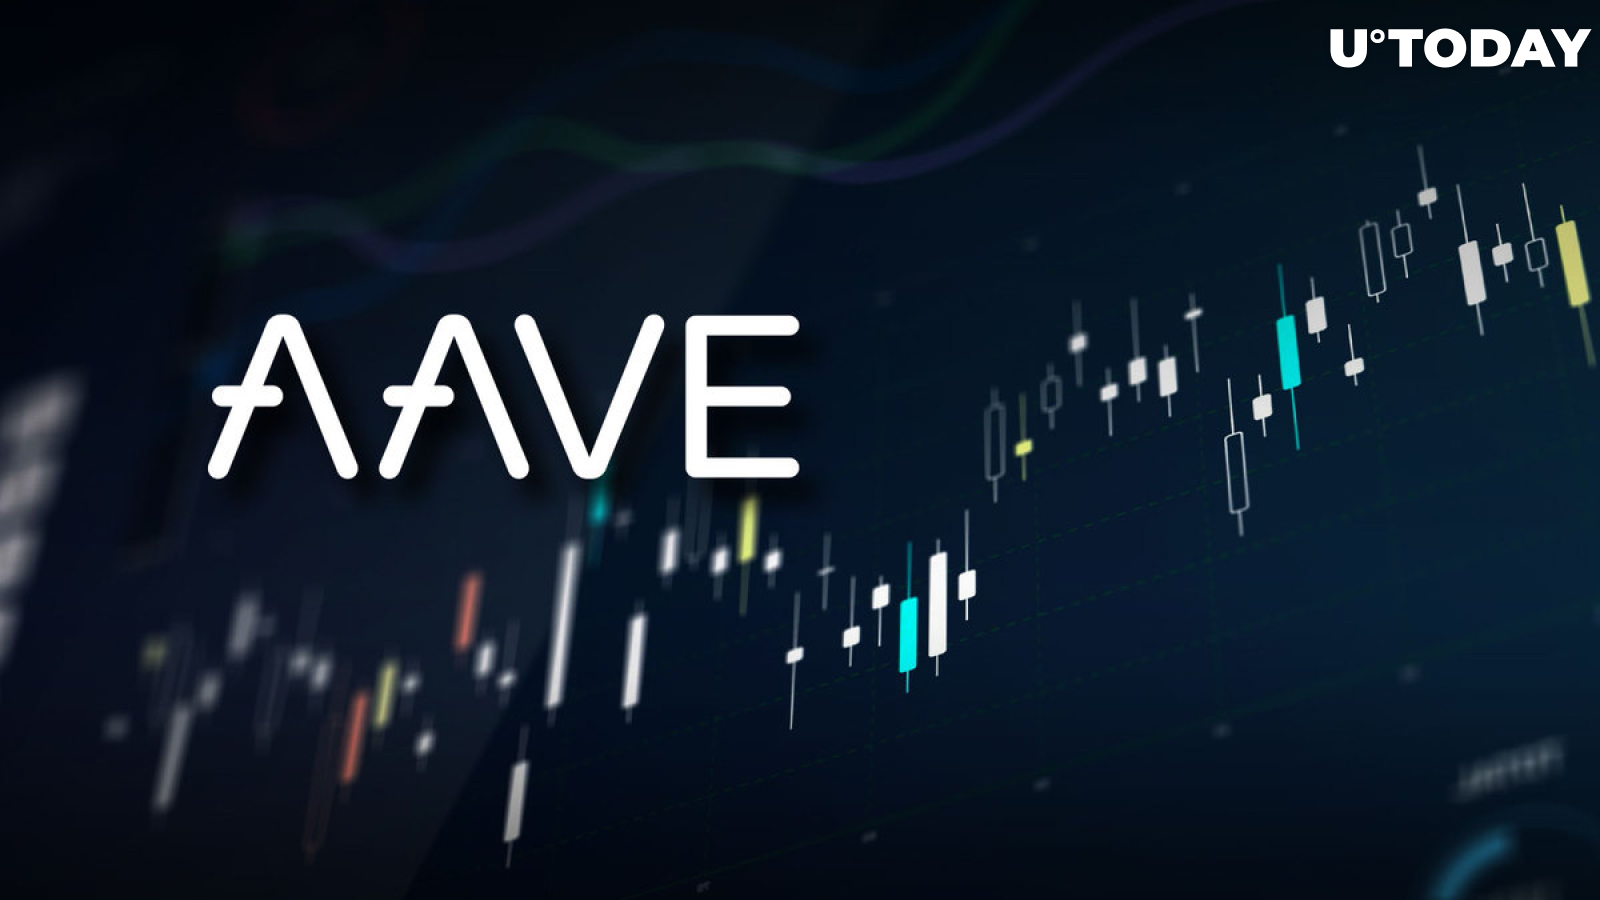 Aave (AAVE) Breakthrough Ends Up Successful, What's Next?